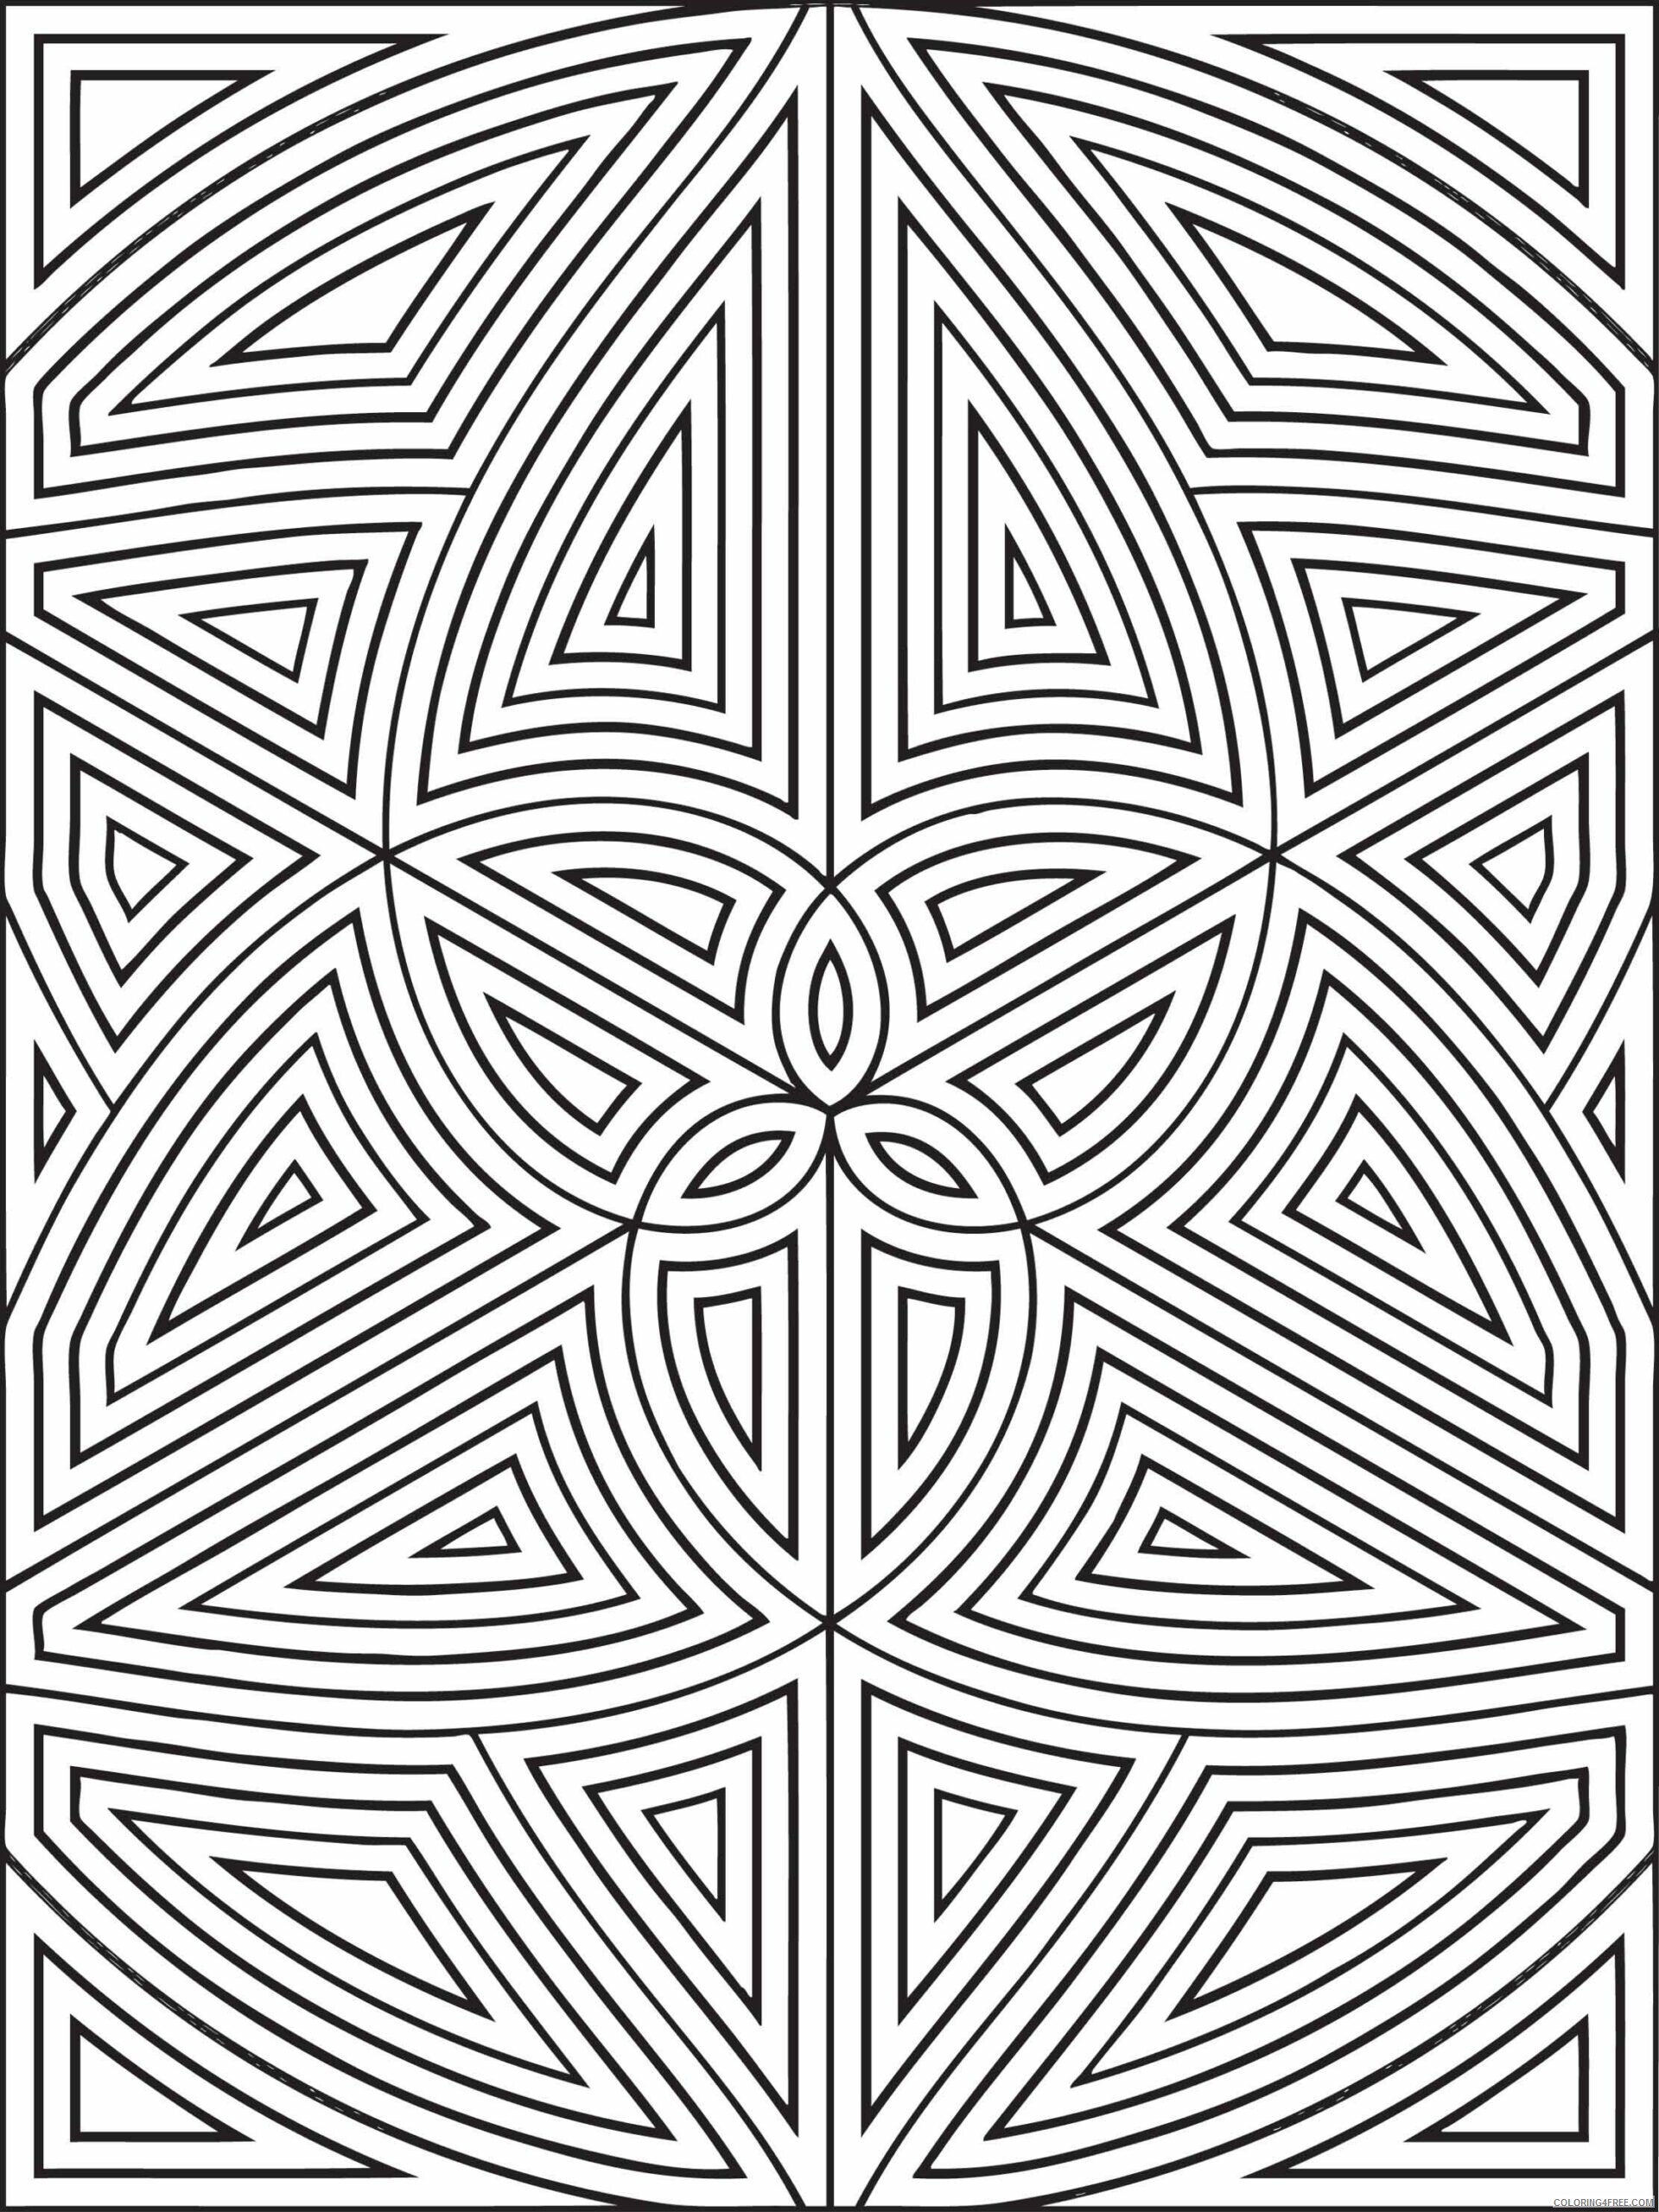 Shapes Coloring Pages Educational Geometric Shapes Printable 2020 1869 Coloring4free